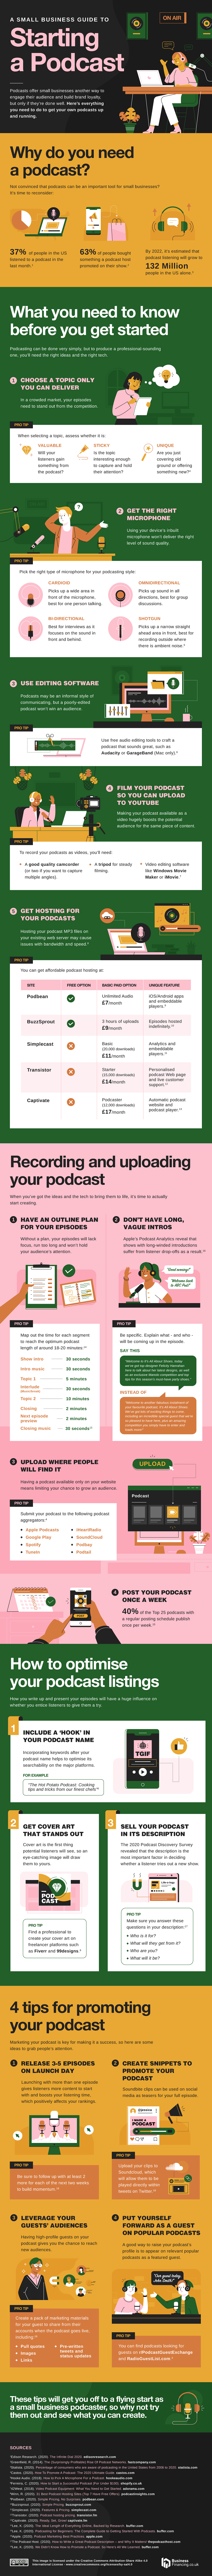 a small business guide to starting a podcast infographic